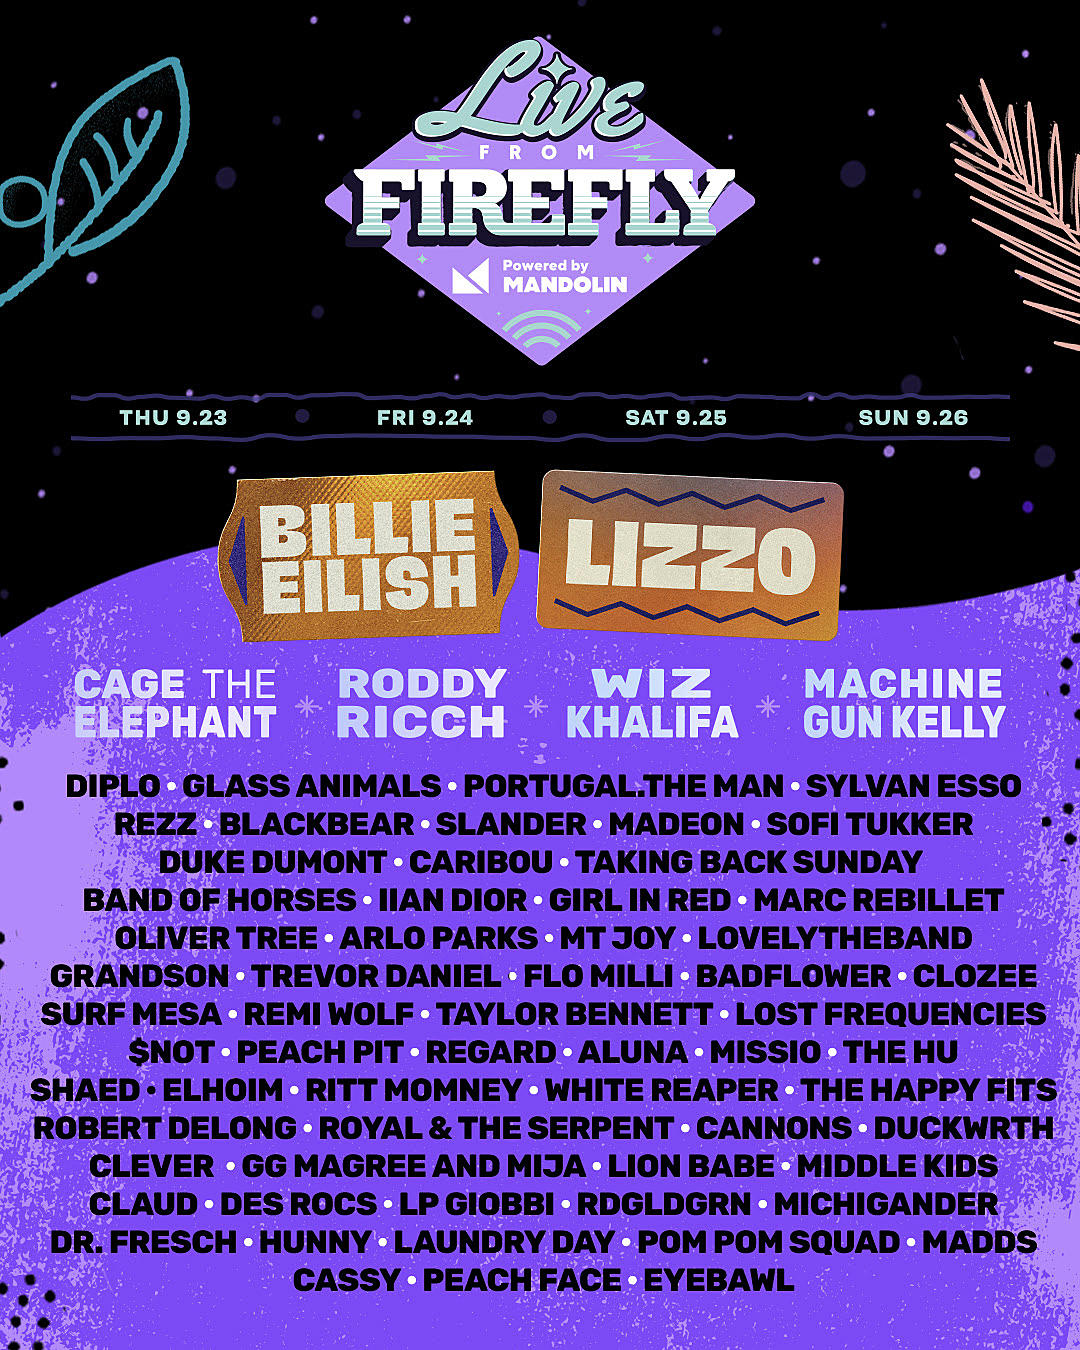 Firefly Festival | Live Stream, Lineup, and Tickets Info